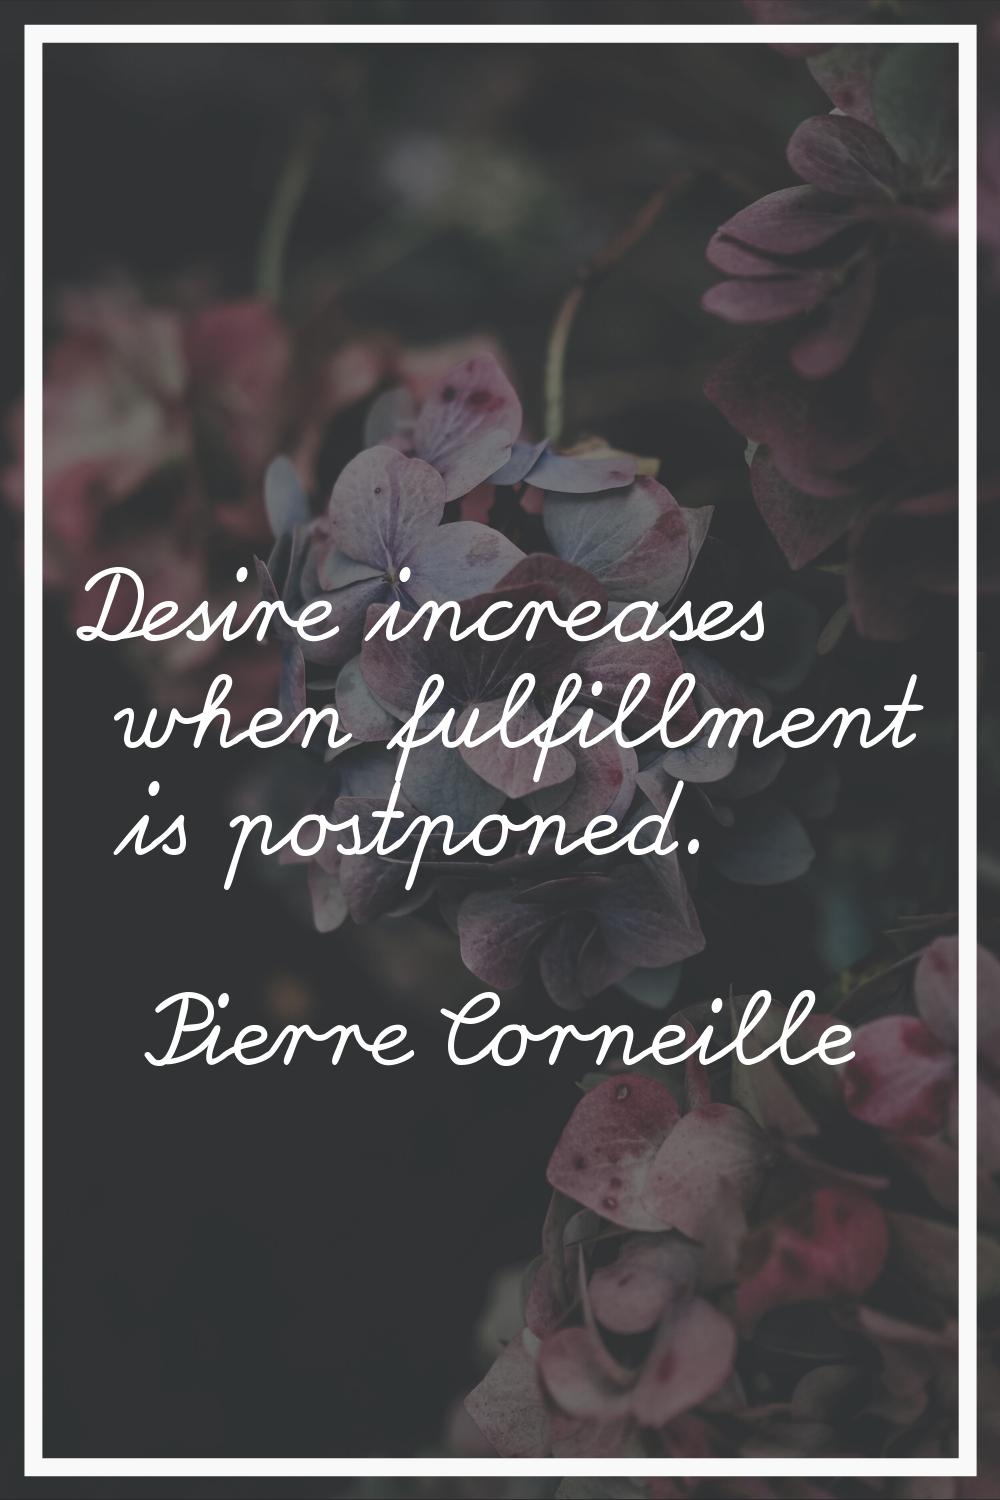 Desire increases when fulfillment is postponed.